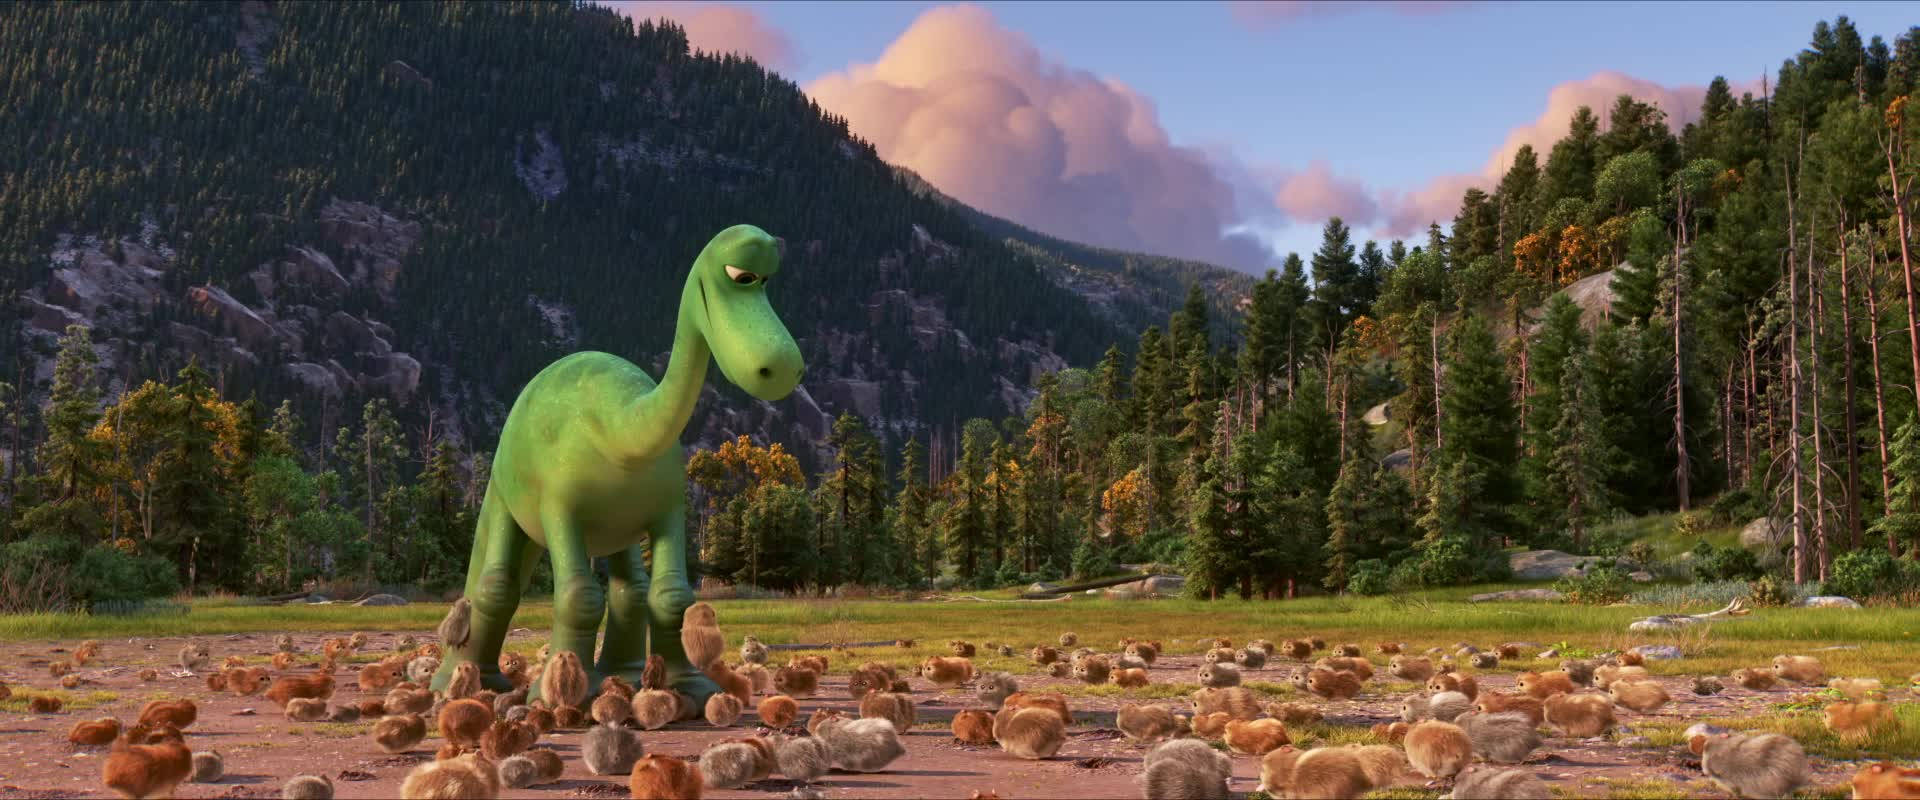 The Good Dinosaur With Squirrels Wallpaper